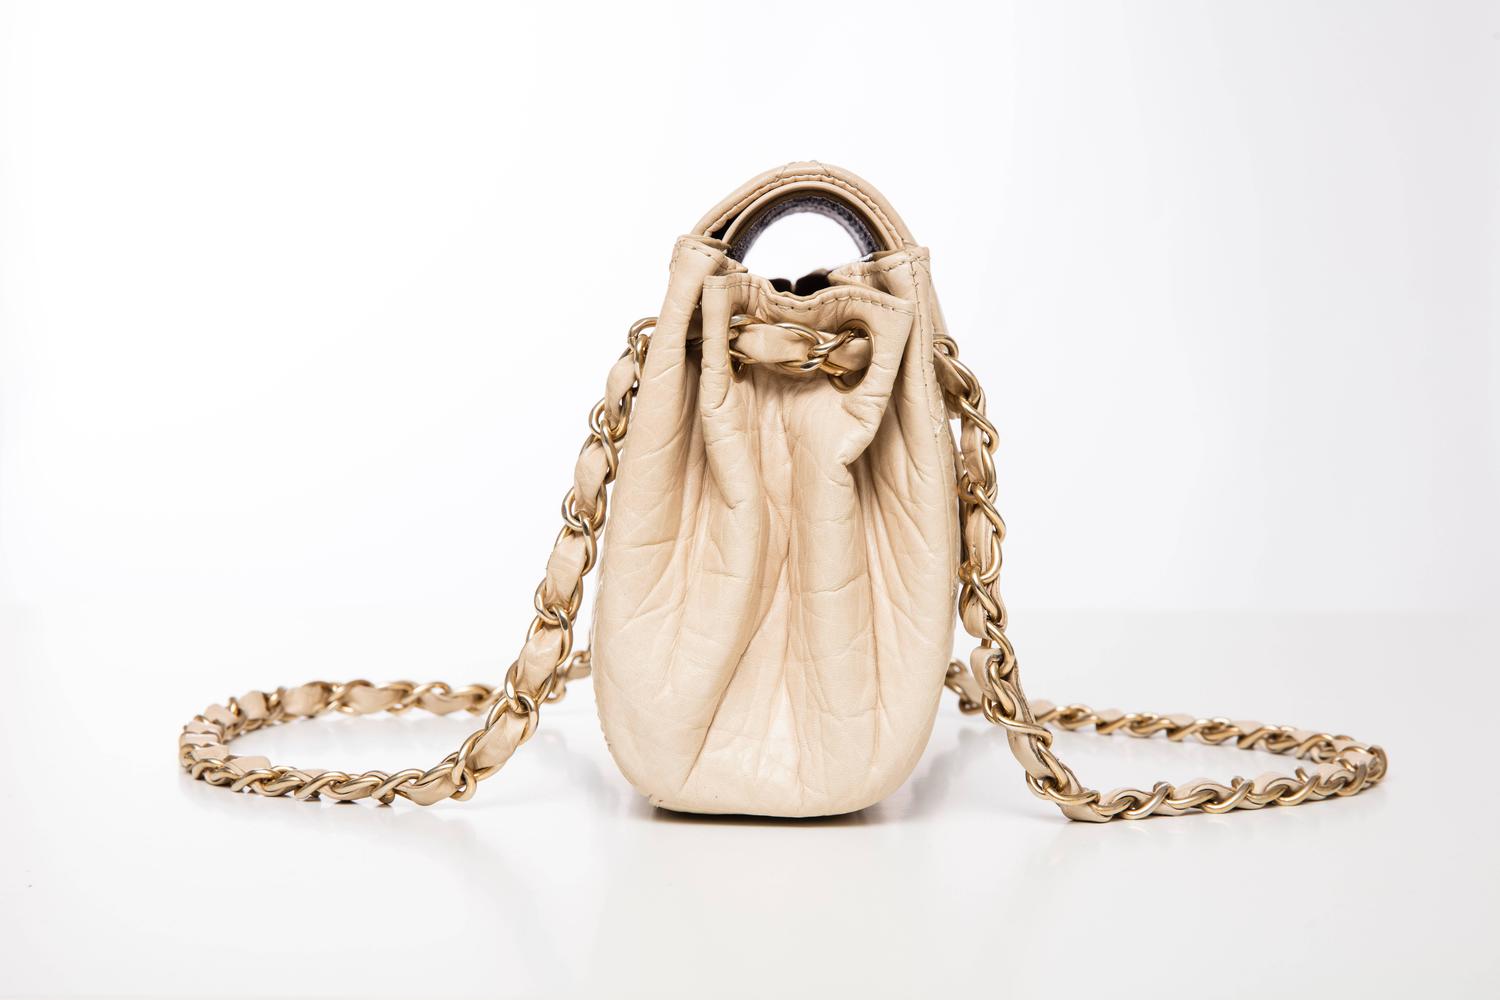 Chanel Beige Quilted Leather Sac Class Rabat Bag For Sale at 1stdibs